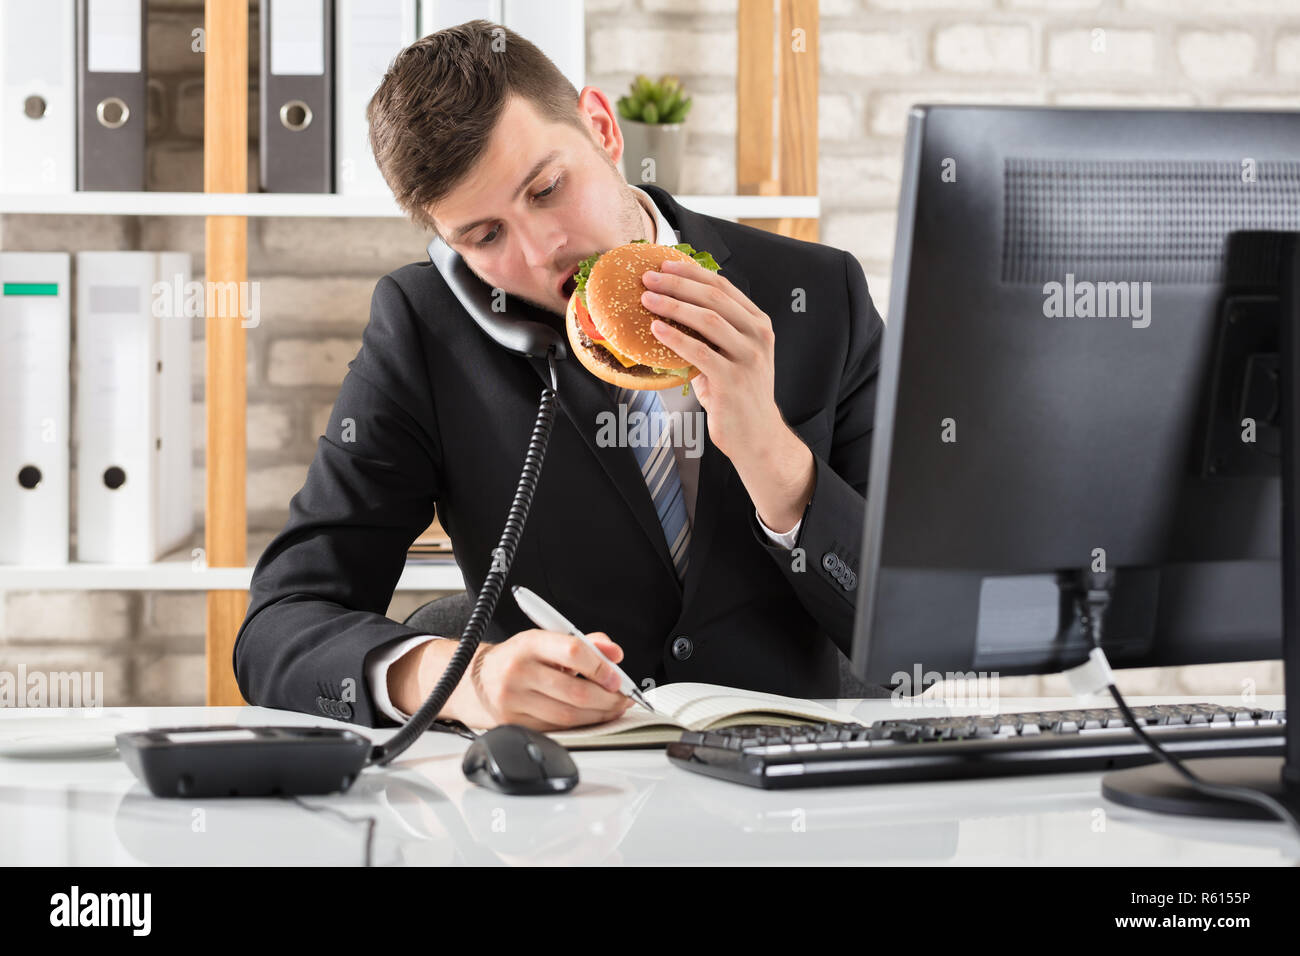 Business Man At Desk Eating Burger And Working Stock Photo